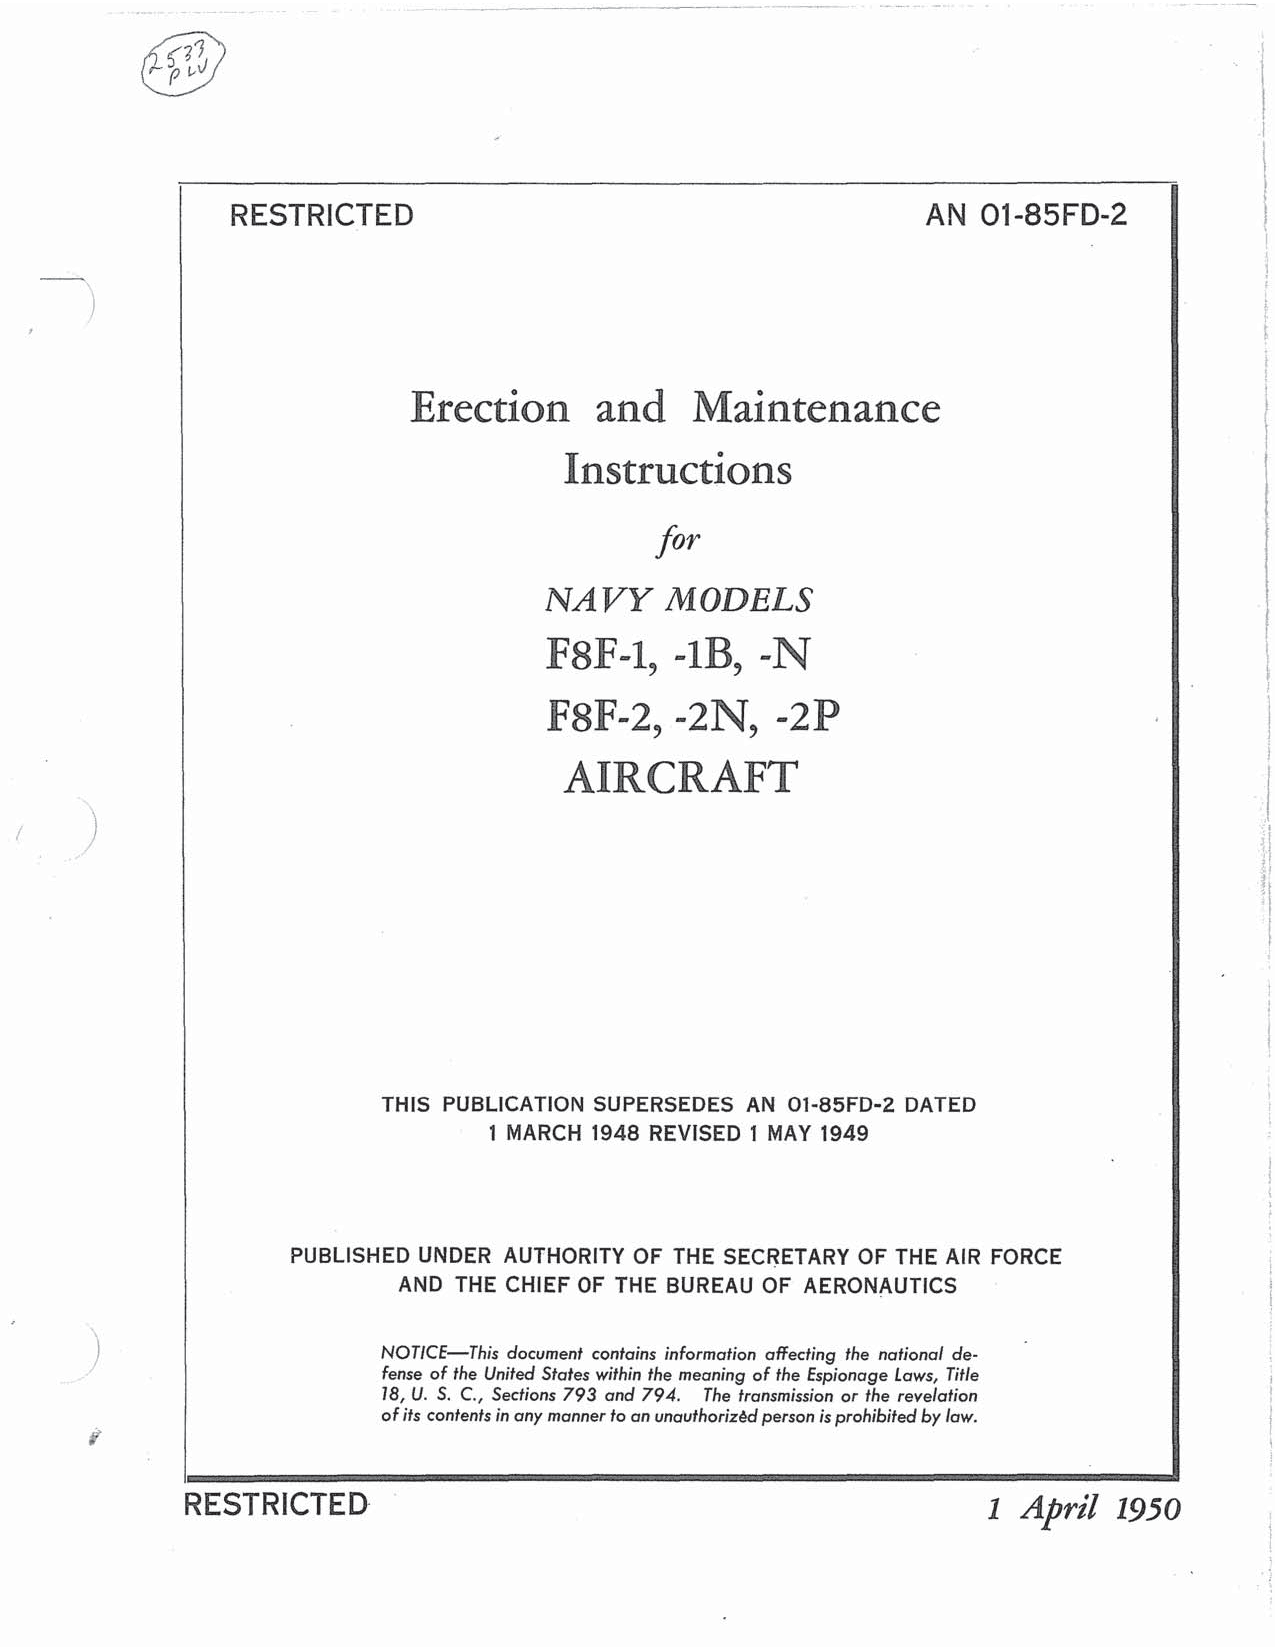 Sample page 1 from AirCorps Library document: Erection & Maintenance - F8F